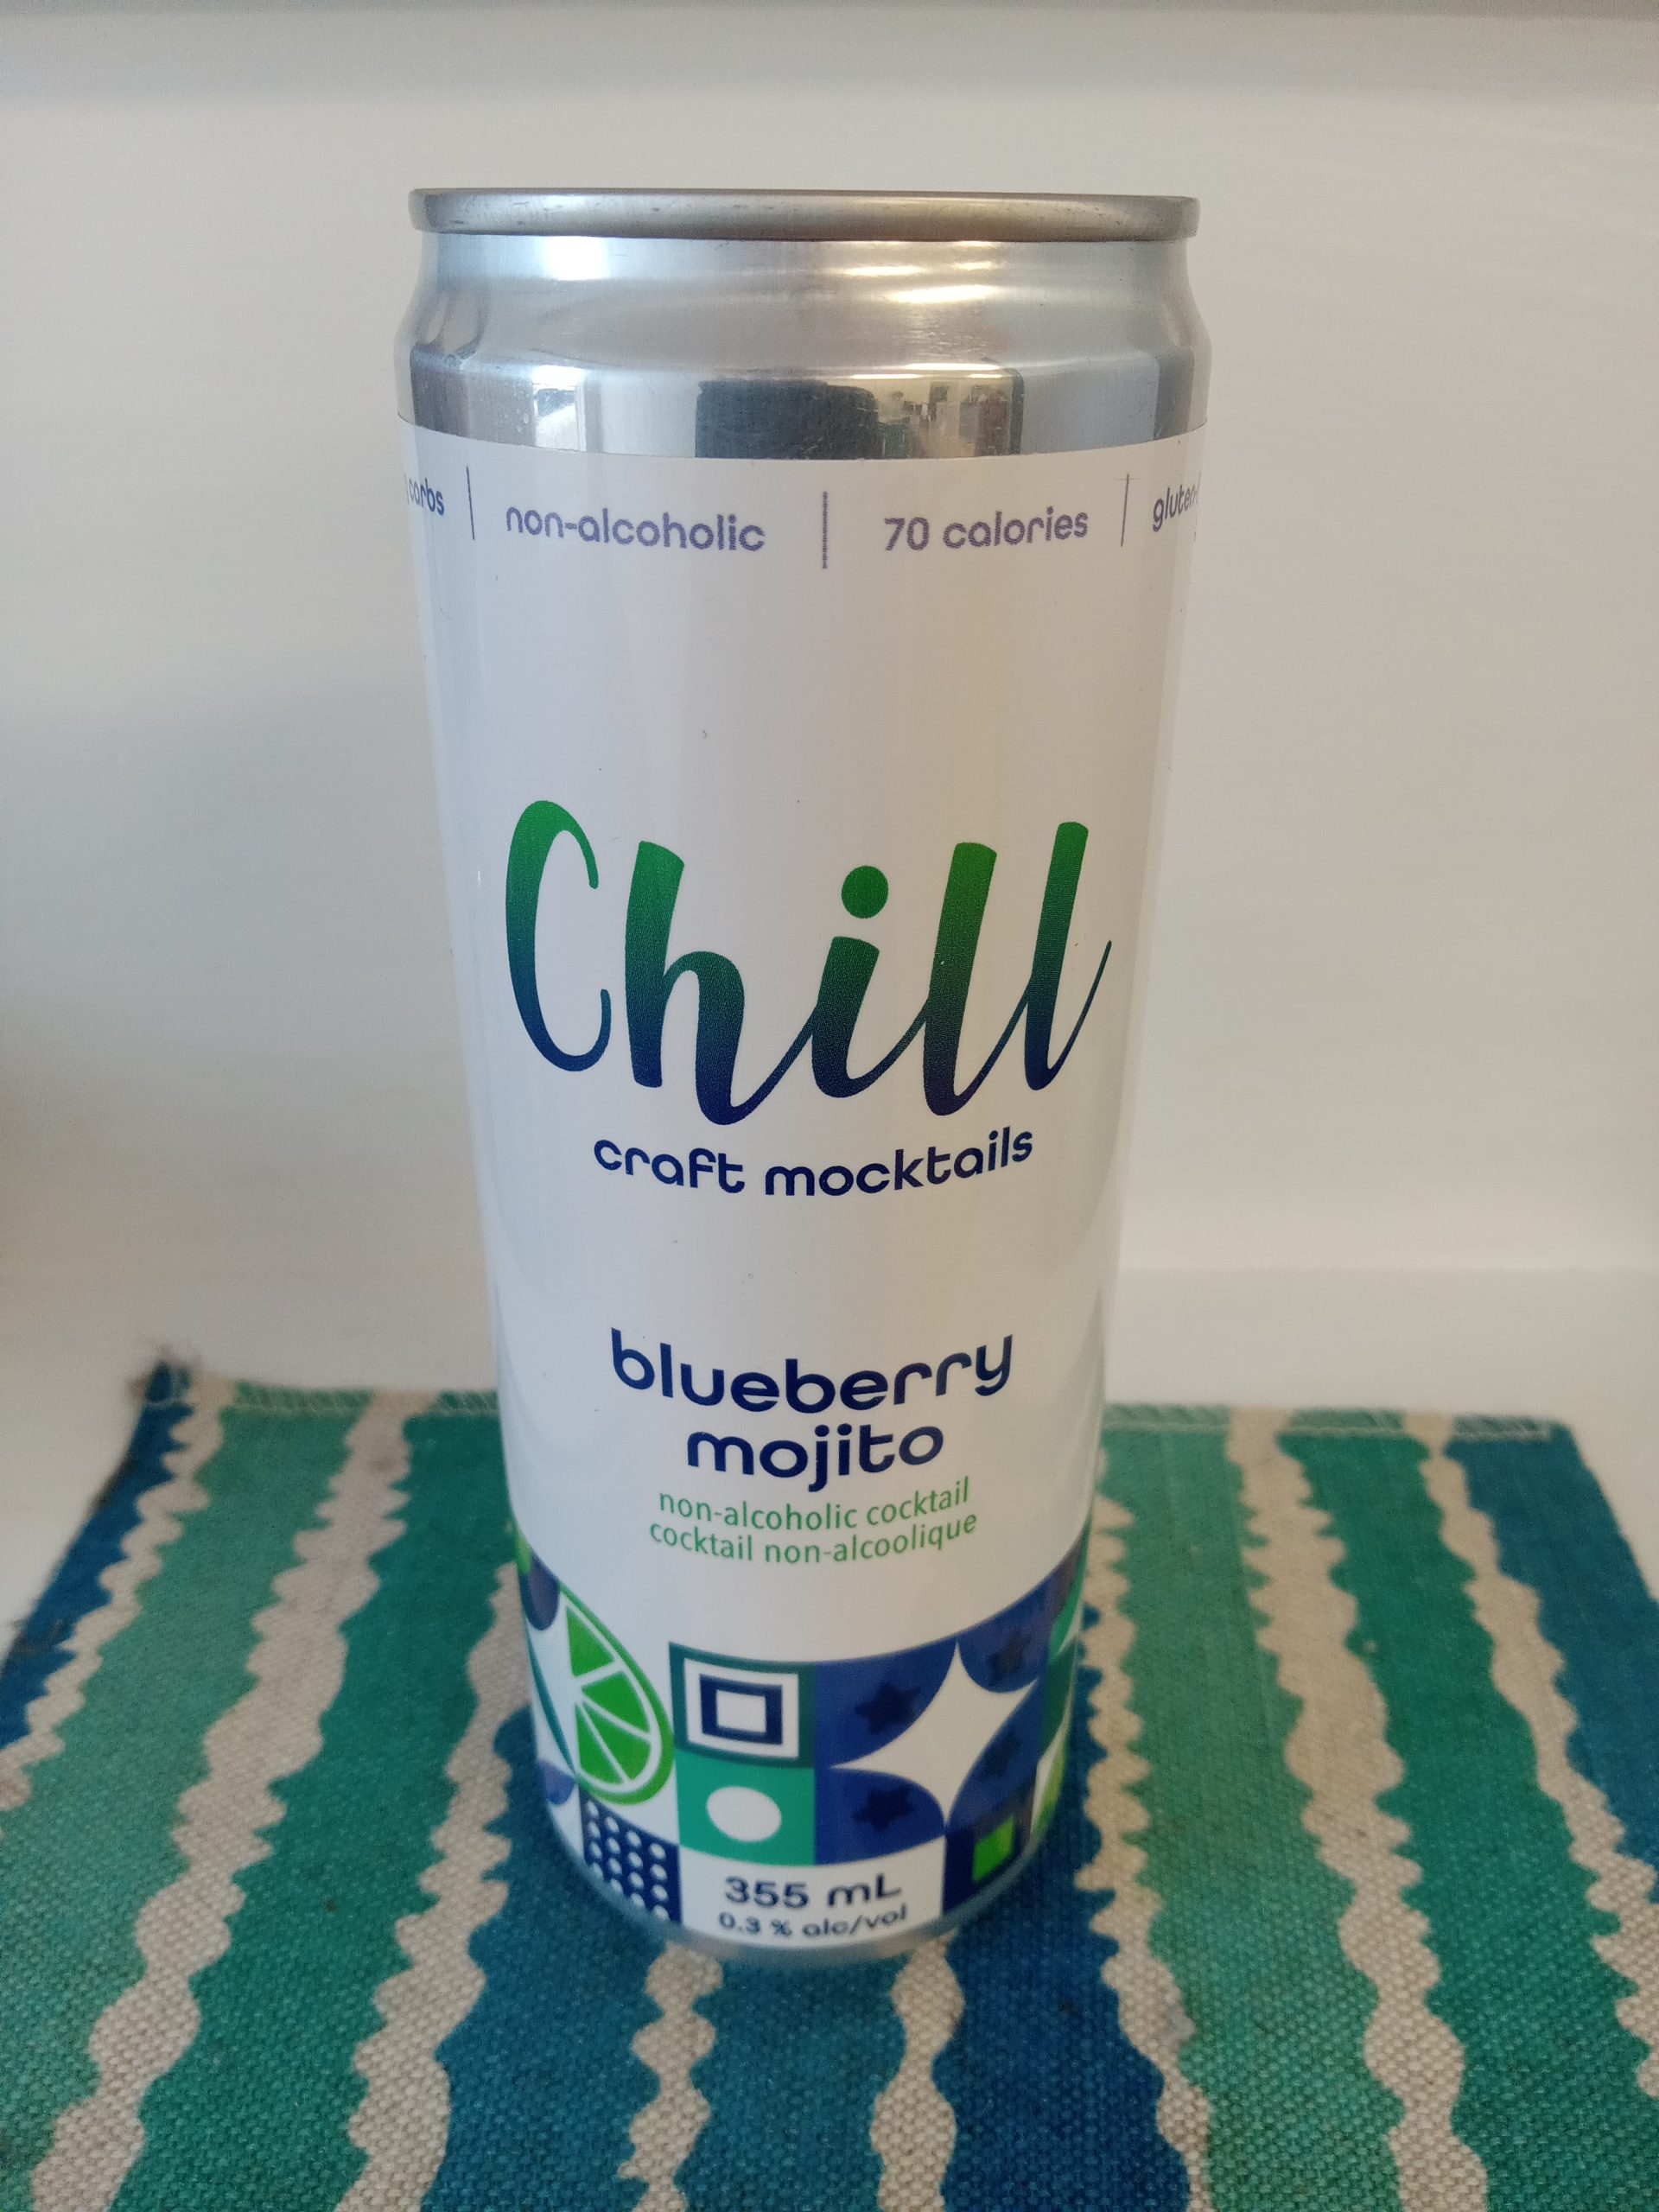 Chill St Mocktail Blueberry Mojito